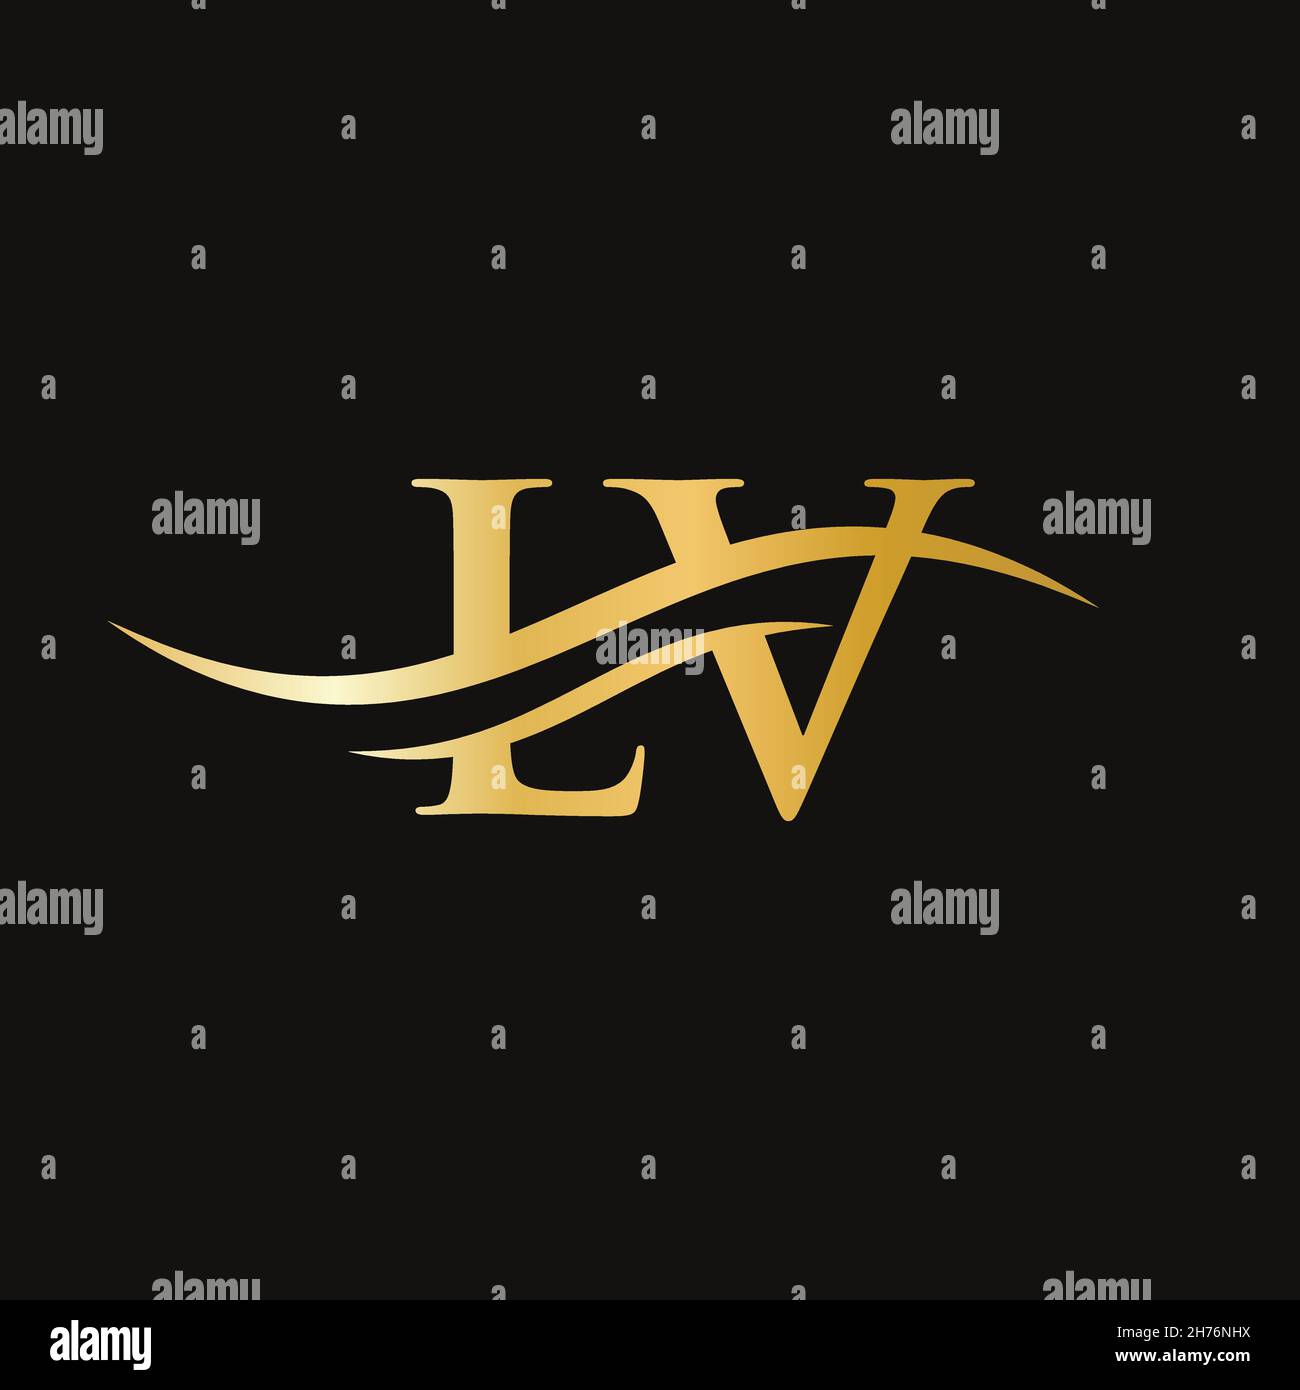 LV Linked Logo for business and company identity. Creative Letter LV Logo Vector Stock Vector